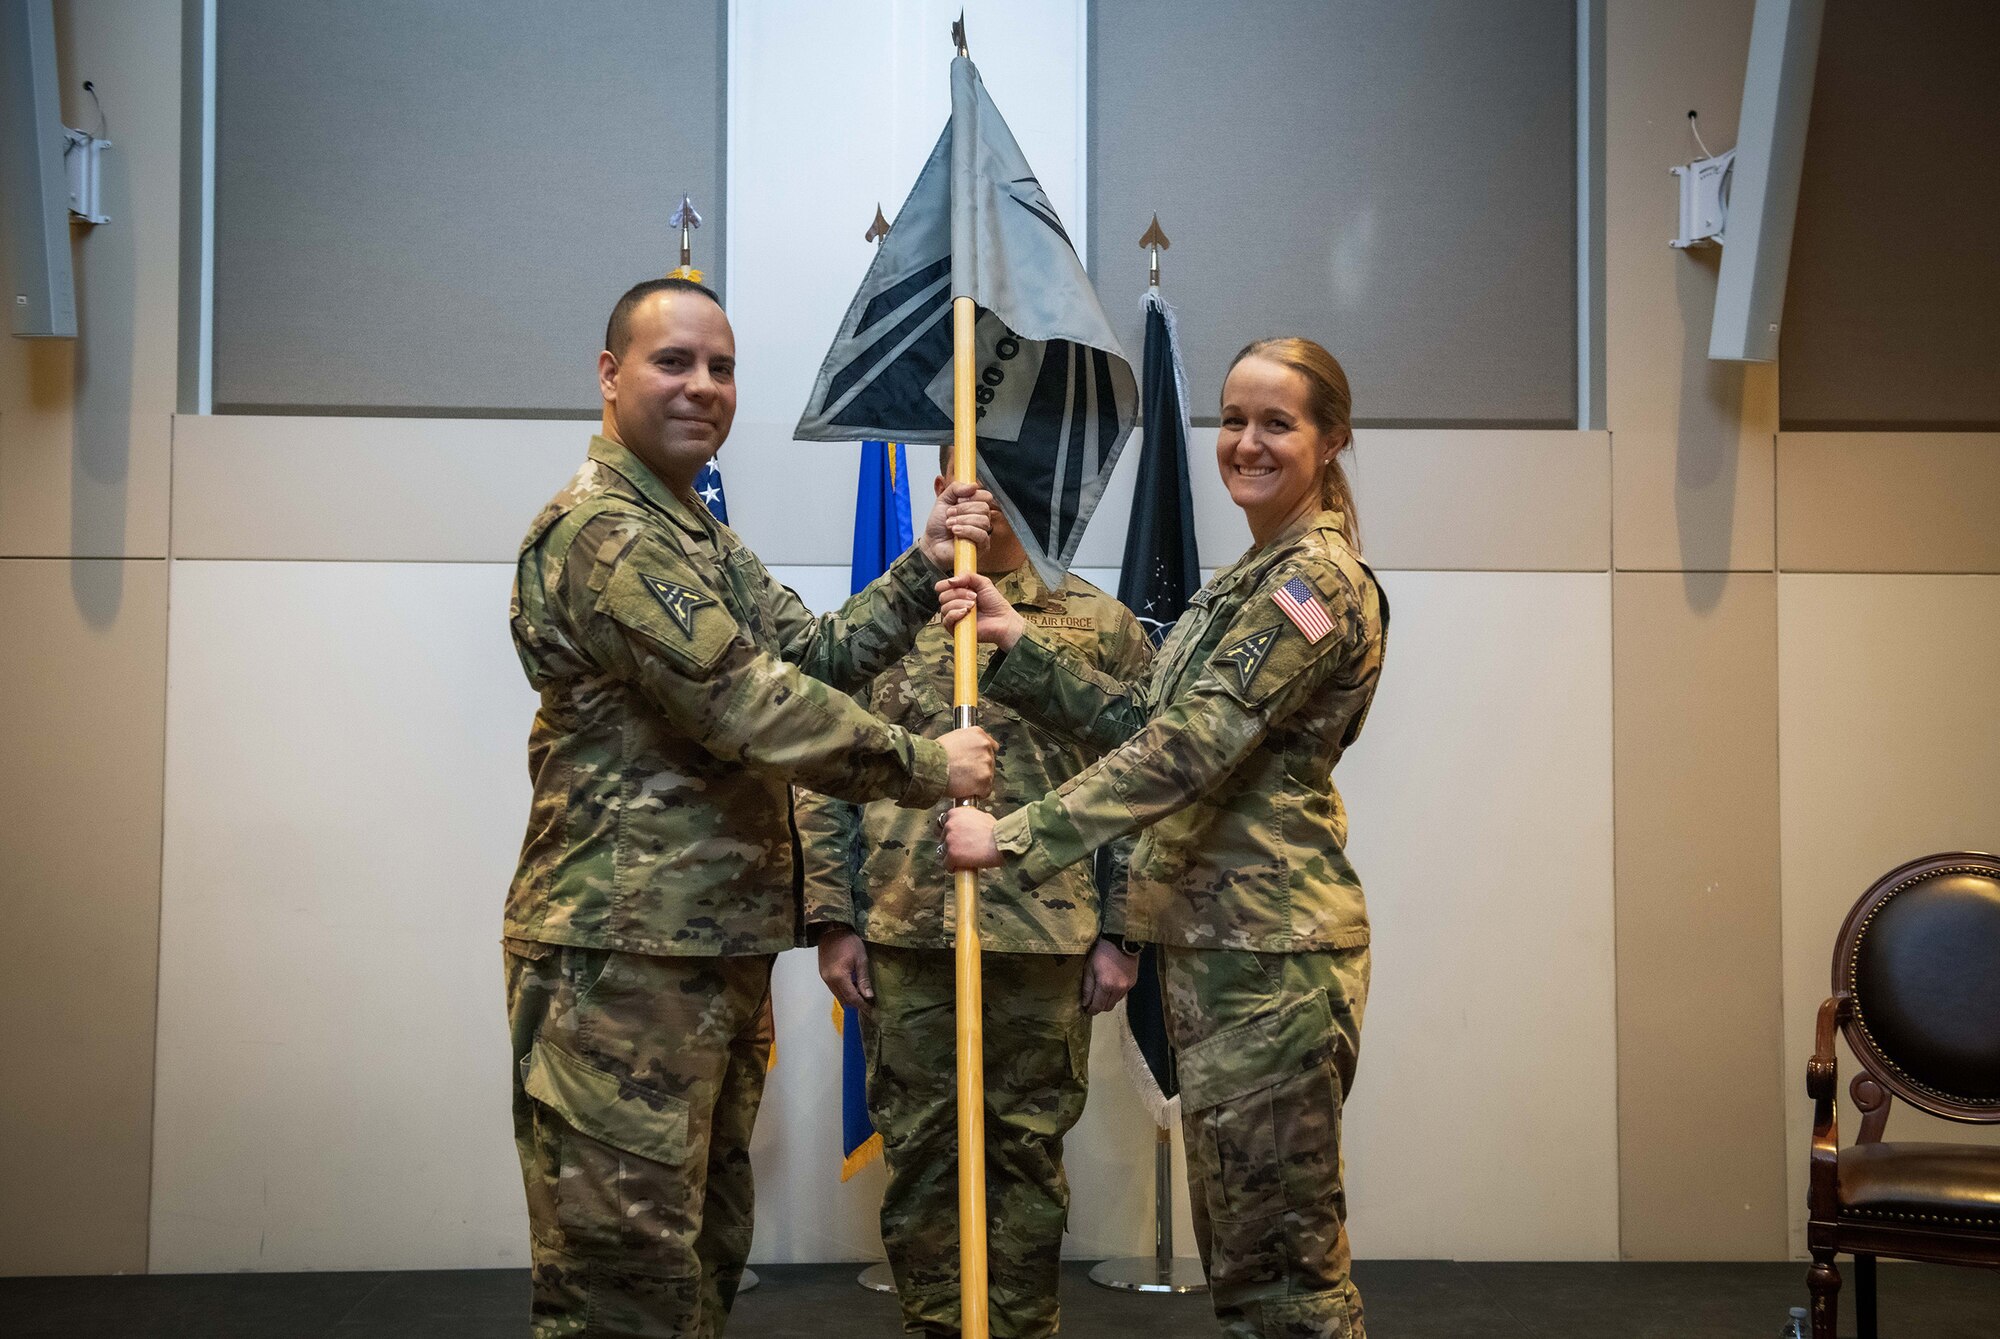 U.S. Space Force Col. Miguel Cruz (left), the Space Delta 4 commander, is given the 460th Operations Support Squadron’s guidon from Lt. Col. Carrie Zederkof (right), the DEL 4 S-Staff director, during the inactivation of the 460th OSS ceremony March 11, 2022, at the Leadership Development Center on Buckley Space Force Base, Colo.